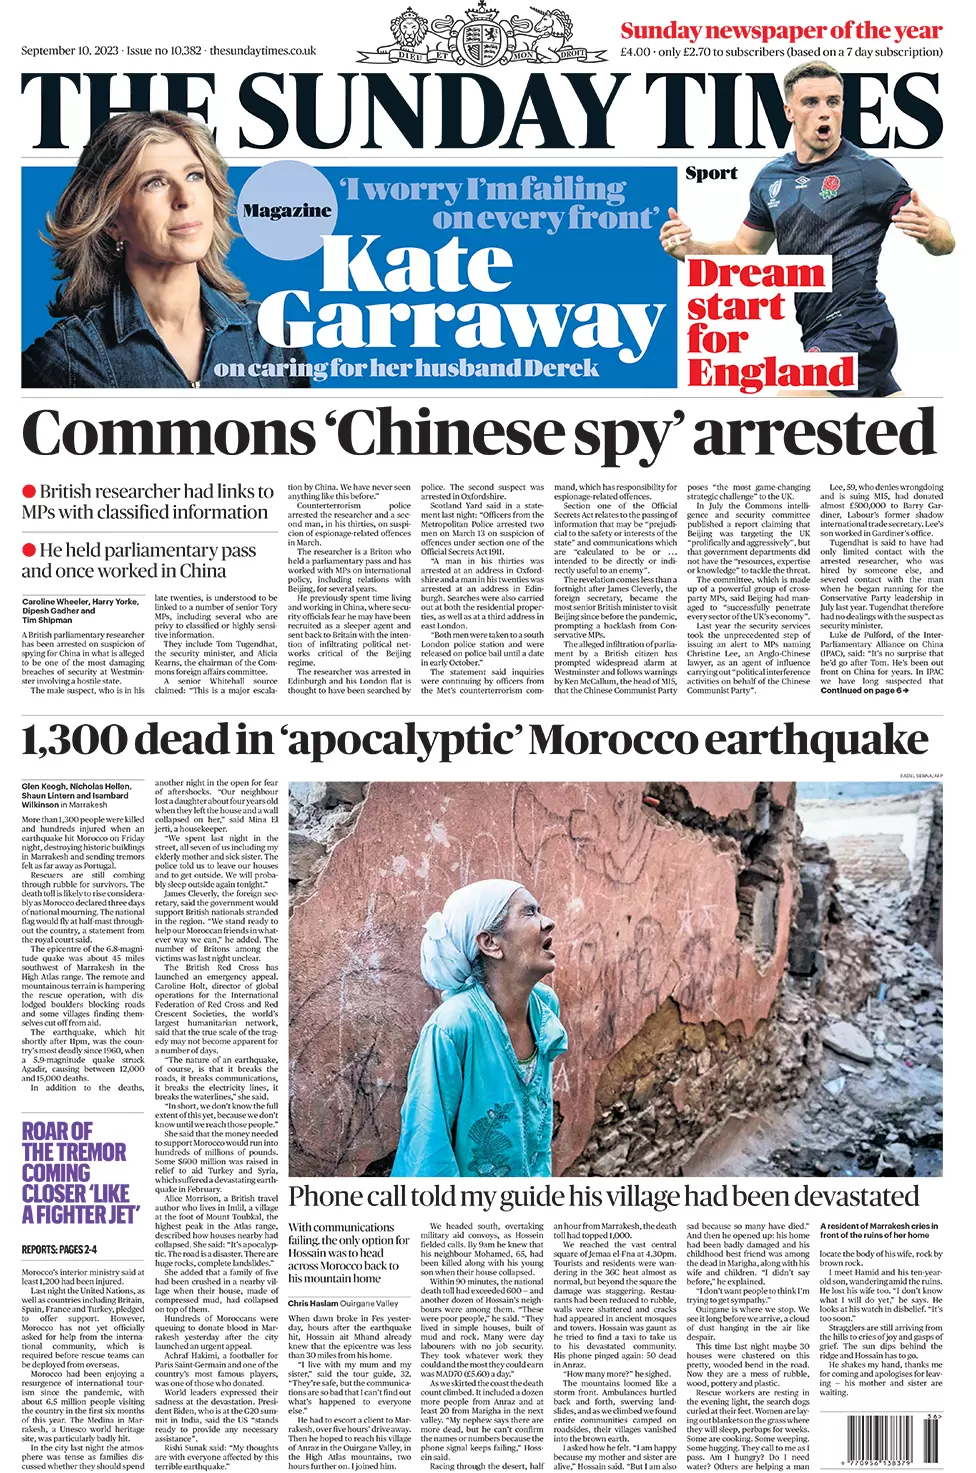 The Sunday Times - Commons ‘Chinese spy’ arrested